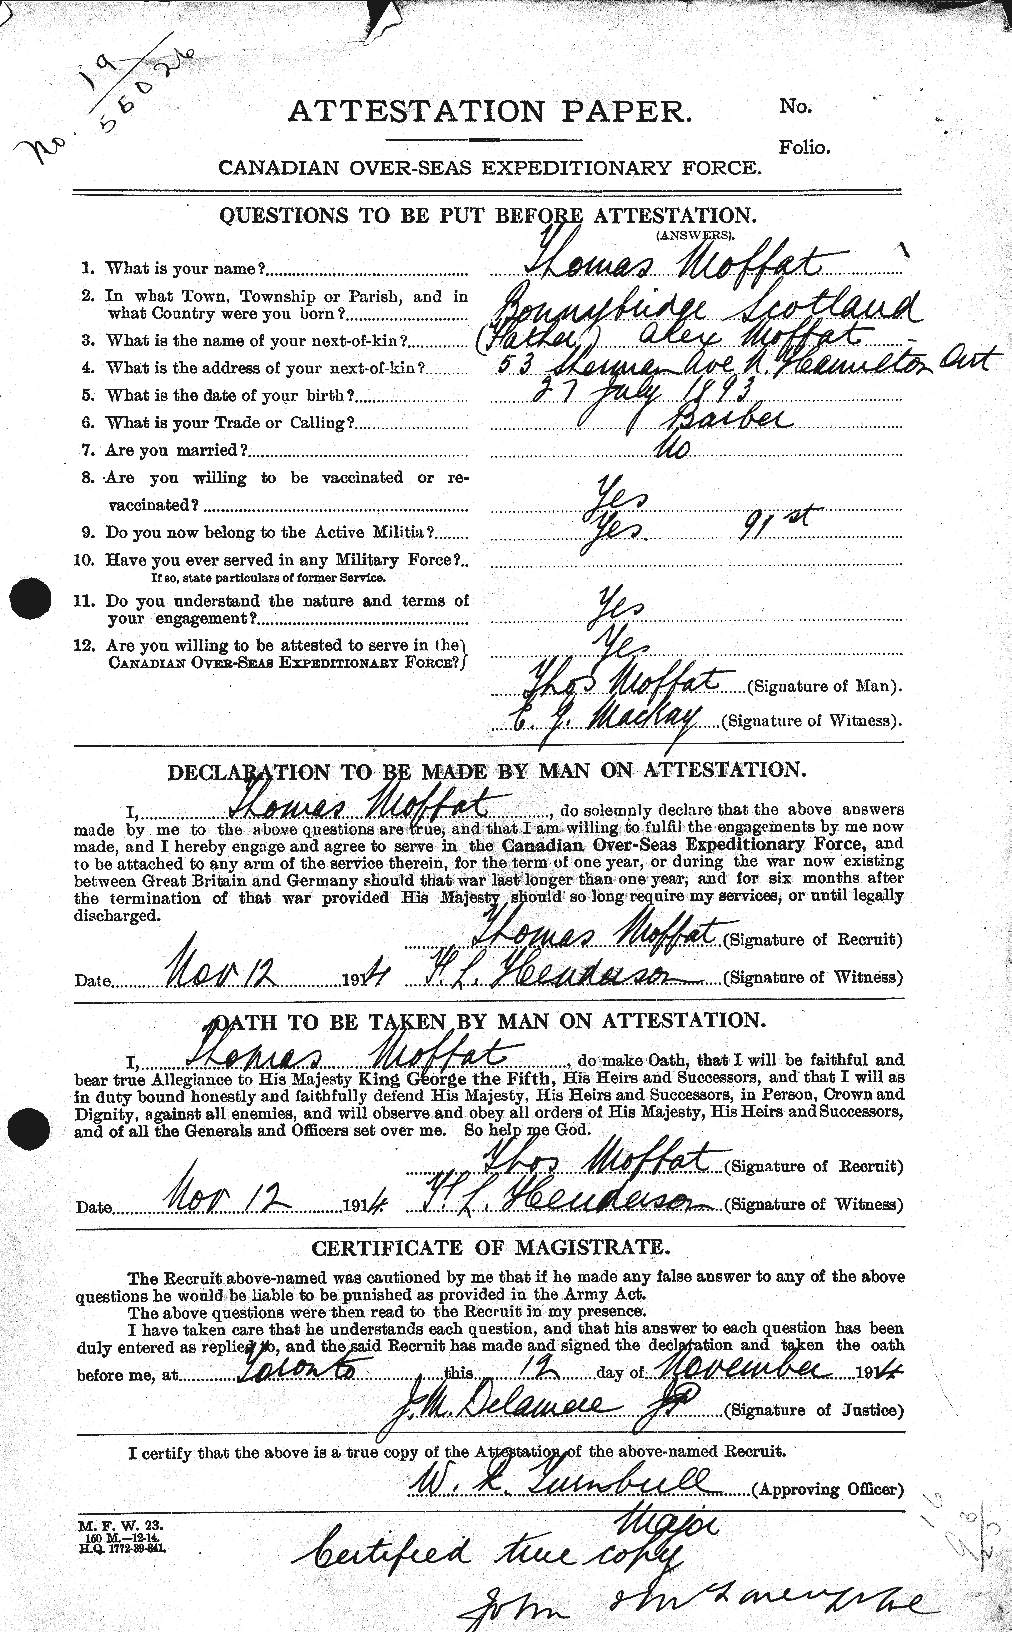 Personnel Records of the First World War - CEF 499077a